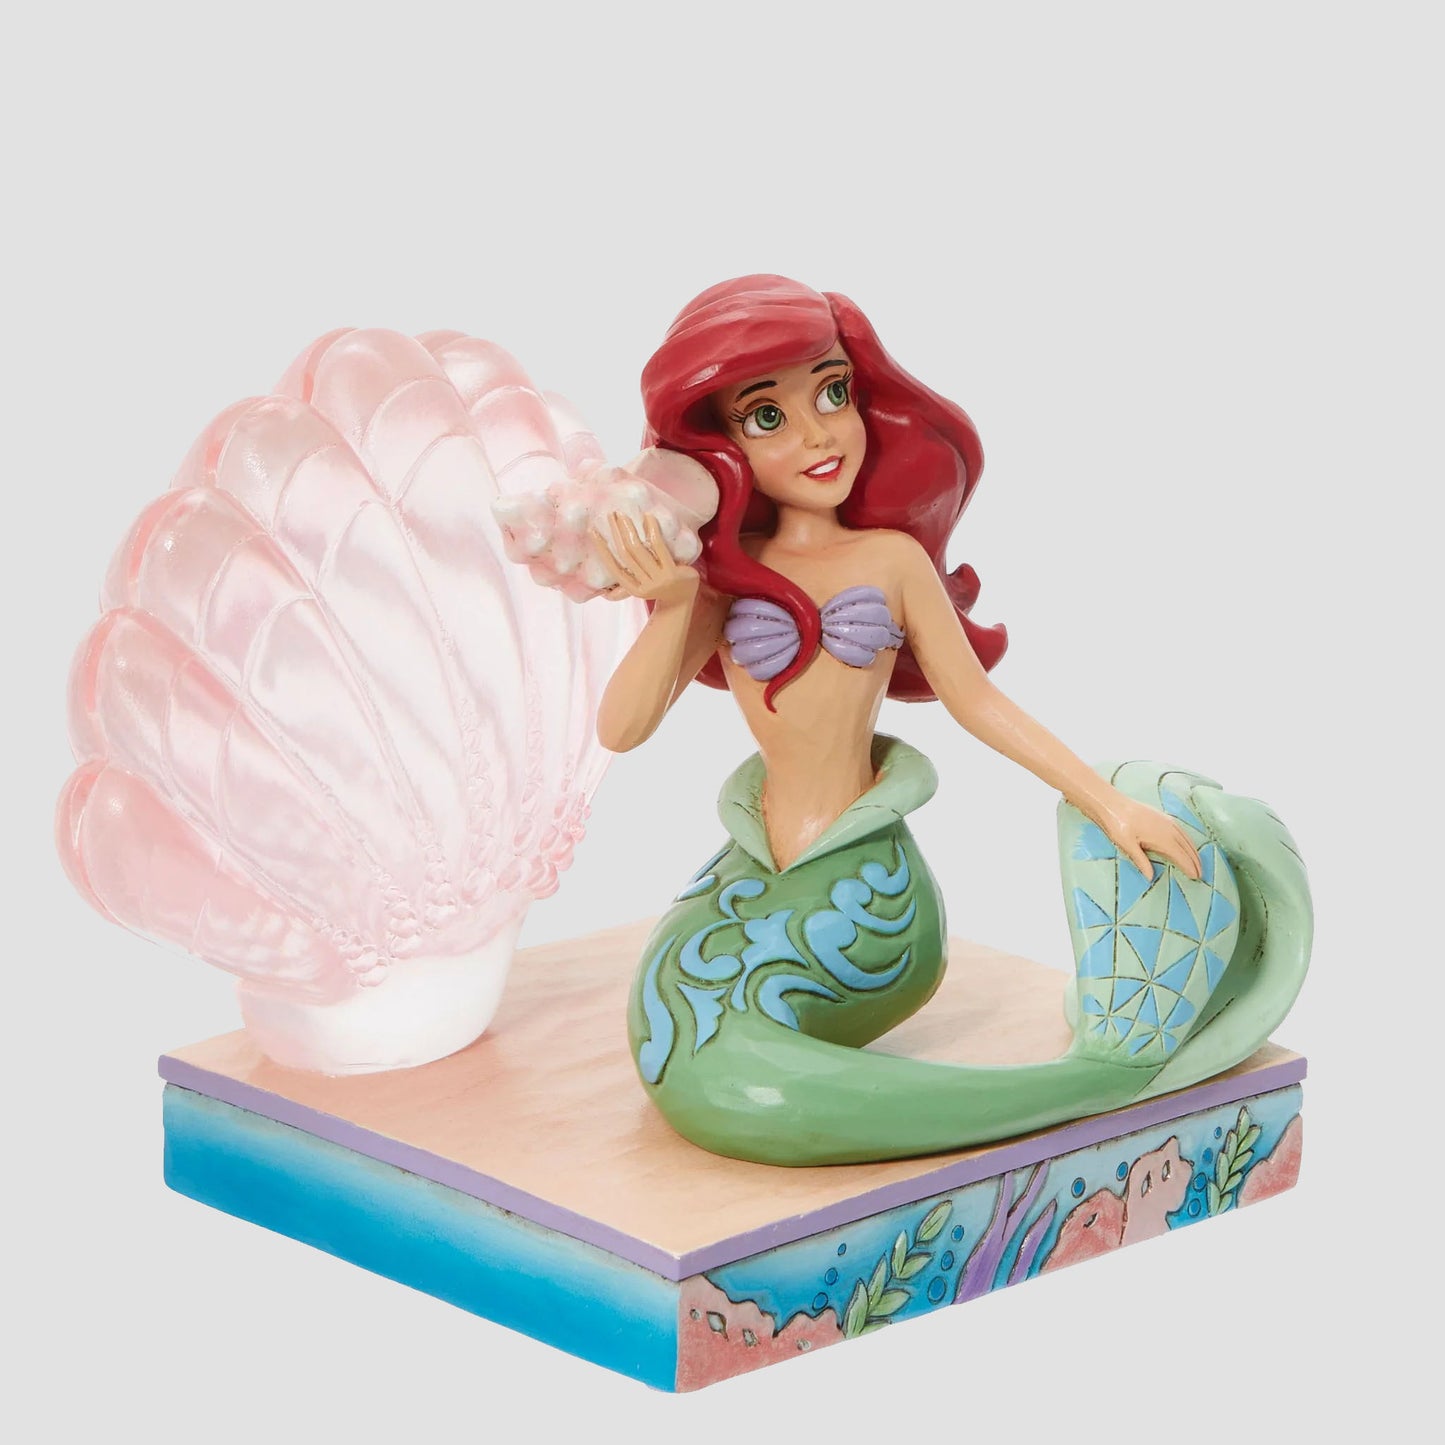 Ariel and Ursula - Disney Collectible By Jim Shore – Disney Art On